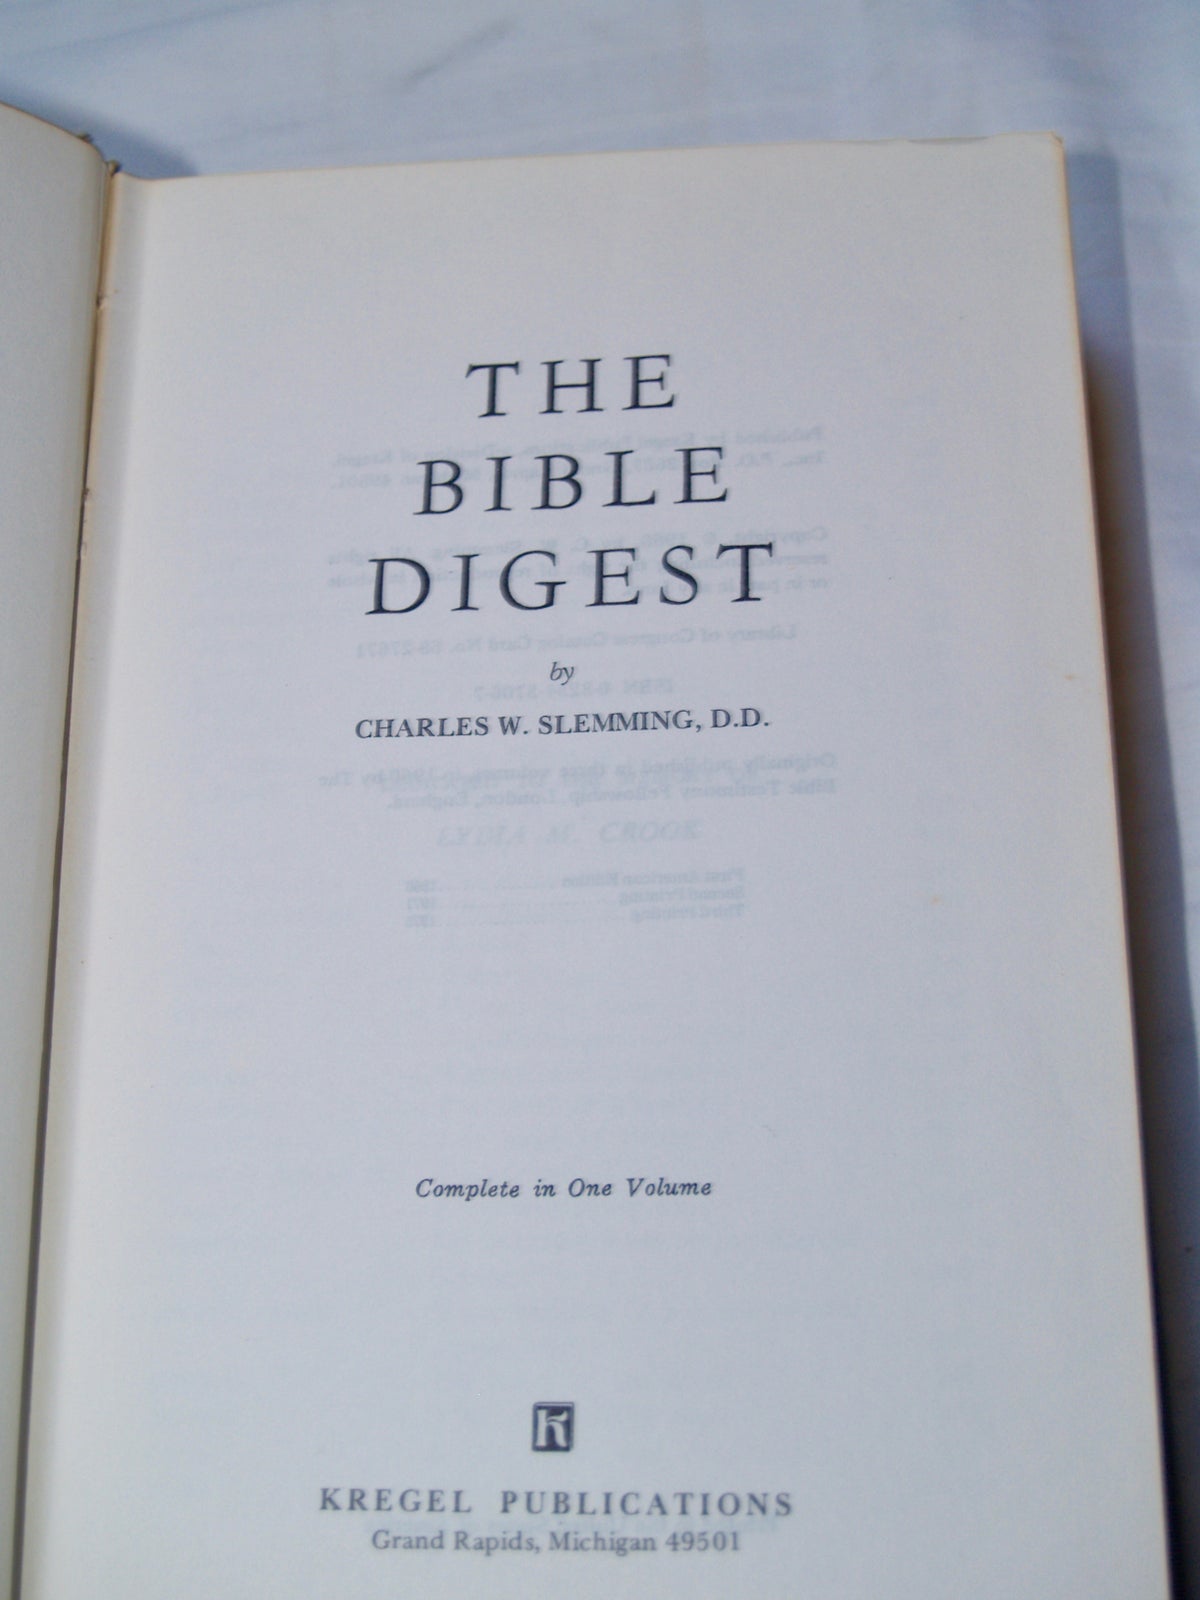 The Bible, Digest